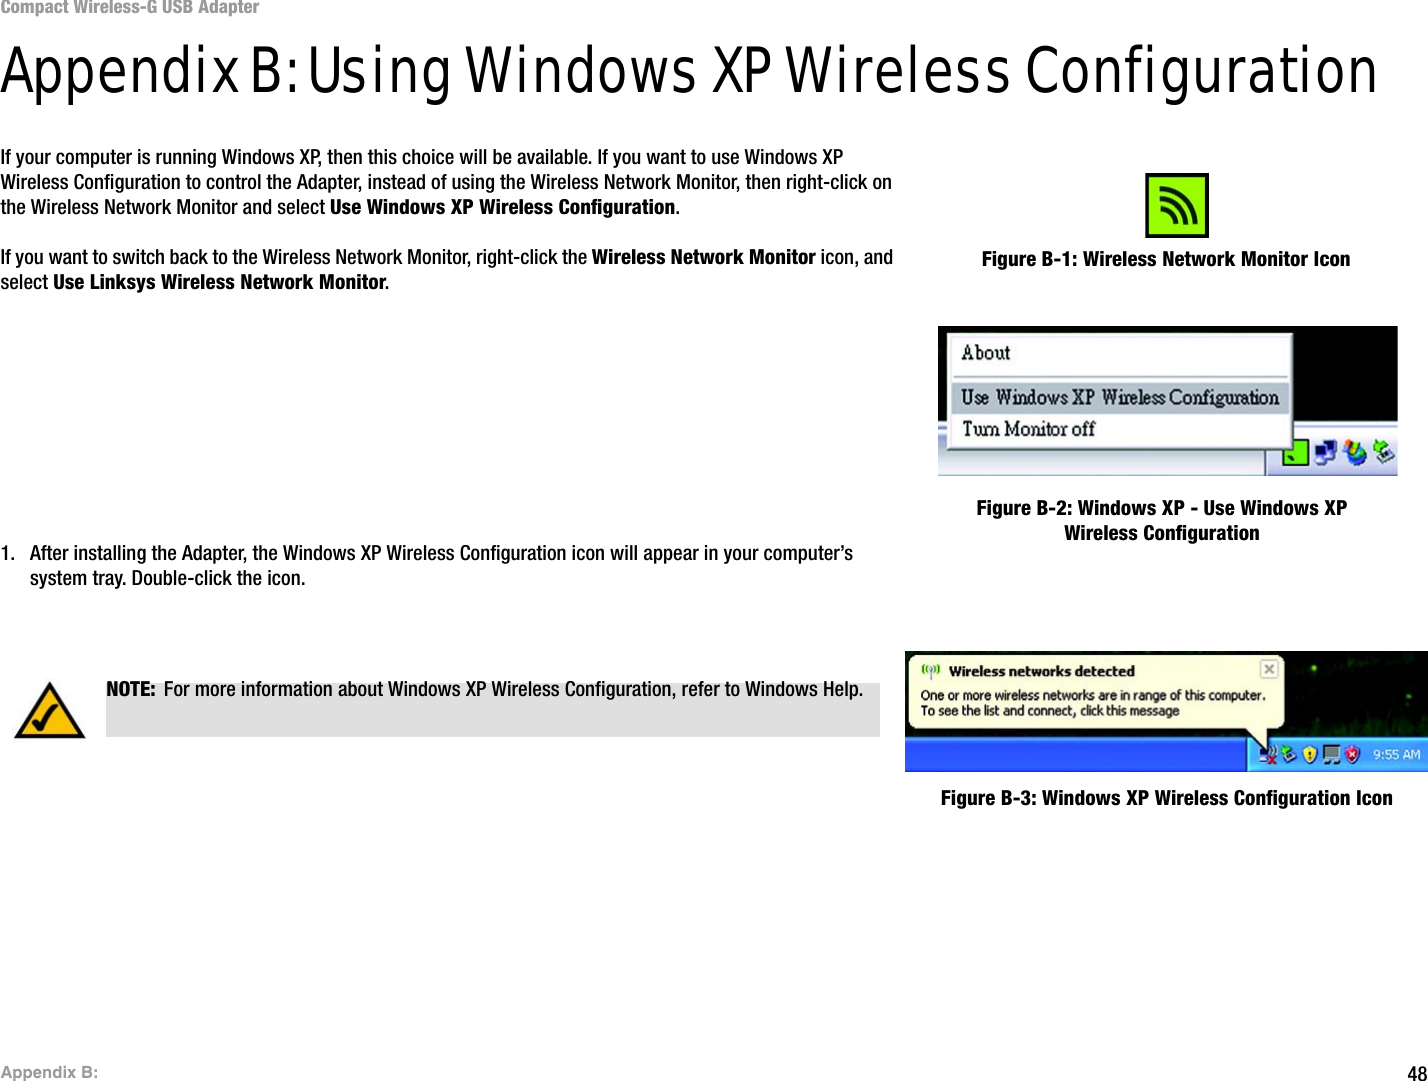 48Appendix B: Compact Wireless-G USB AdapterAppendix B: Using Windows XP Wireless ConfigurationIf your computer is running Windows XP, then this choice will be available. If you want to use Windows XP Wireless Configuration to control the Adapter, instead of using the Wireless Network Monitor, then right-click on the Wireless Network Monitor and select Use Windows XP Wireless Configuration. If you want to switch back to the Wireless Network Monitor, right-click the Wireless Network Monitor icon, and select Use Linksys Wireless Network Monitor.1. After installing the Adapter, the Windows XP Wireless Configuration icon will appear in your computer’s system tray. Double-click the icon. Figure B-1: Wireless Network Monitor IconFigure B-2: Windows XP - Use Windows XP Wireless ConfigurationNOTE: For more information about Windows XP Wireless Configuration, refer to Windows Help.Figure B-3: Windows XP Wireless Configuration Icon